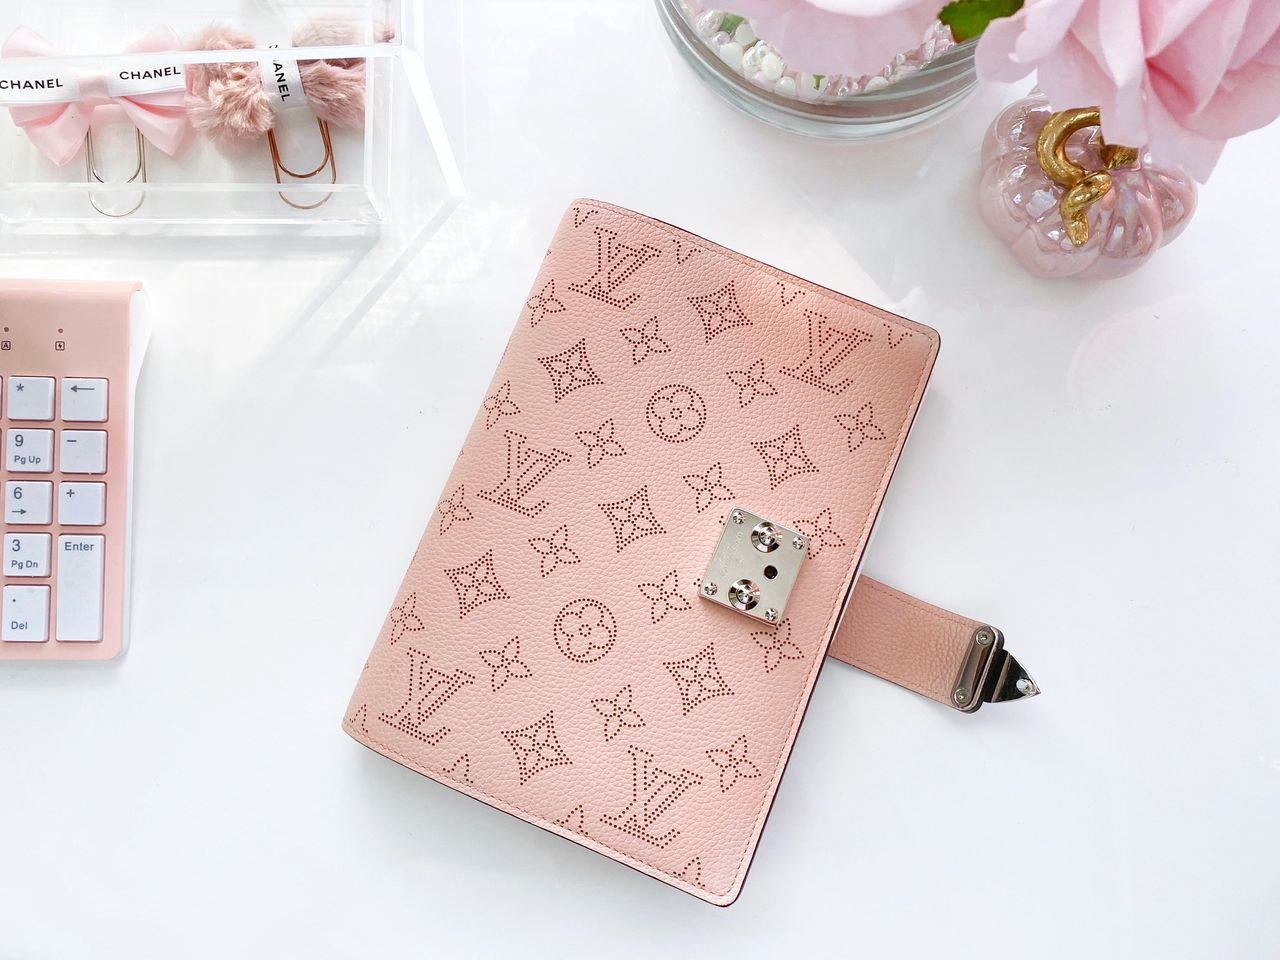 Rare Louis Vuitton notebook cover Agenda PM monogram CA0091 Pink Used from  Japan